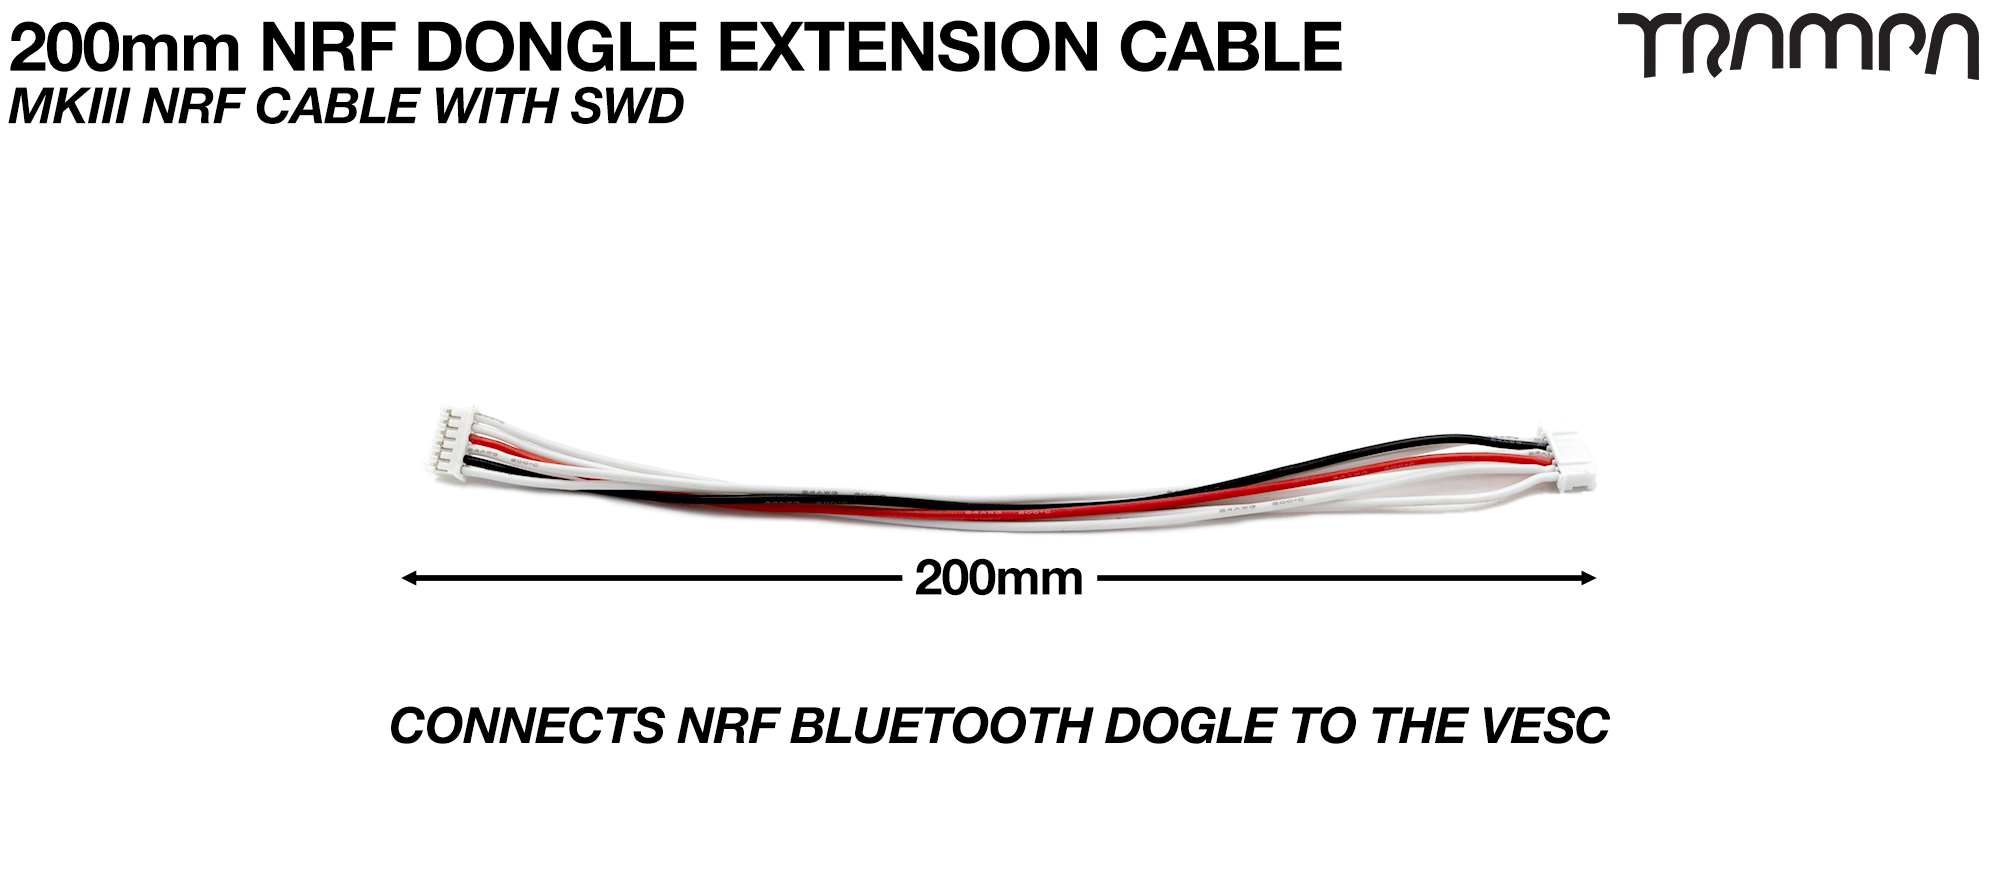 MKIII NRF Dongle Extender cable 200mm with SWD